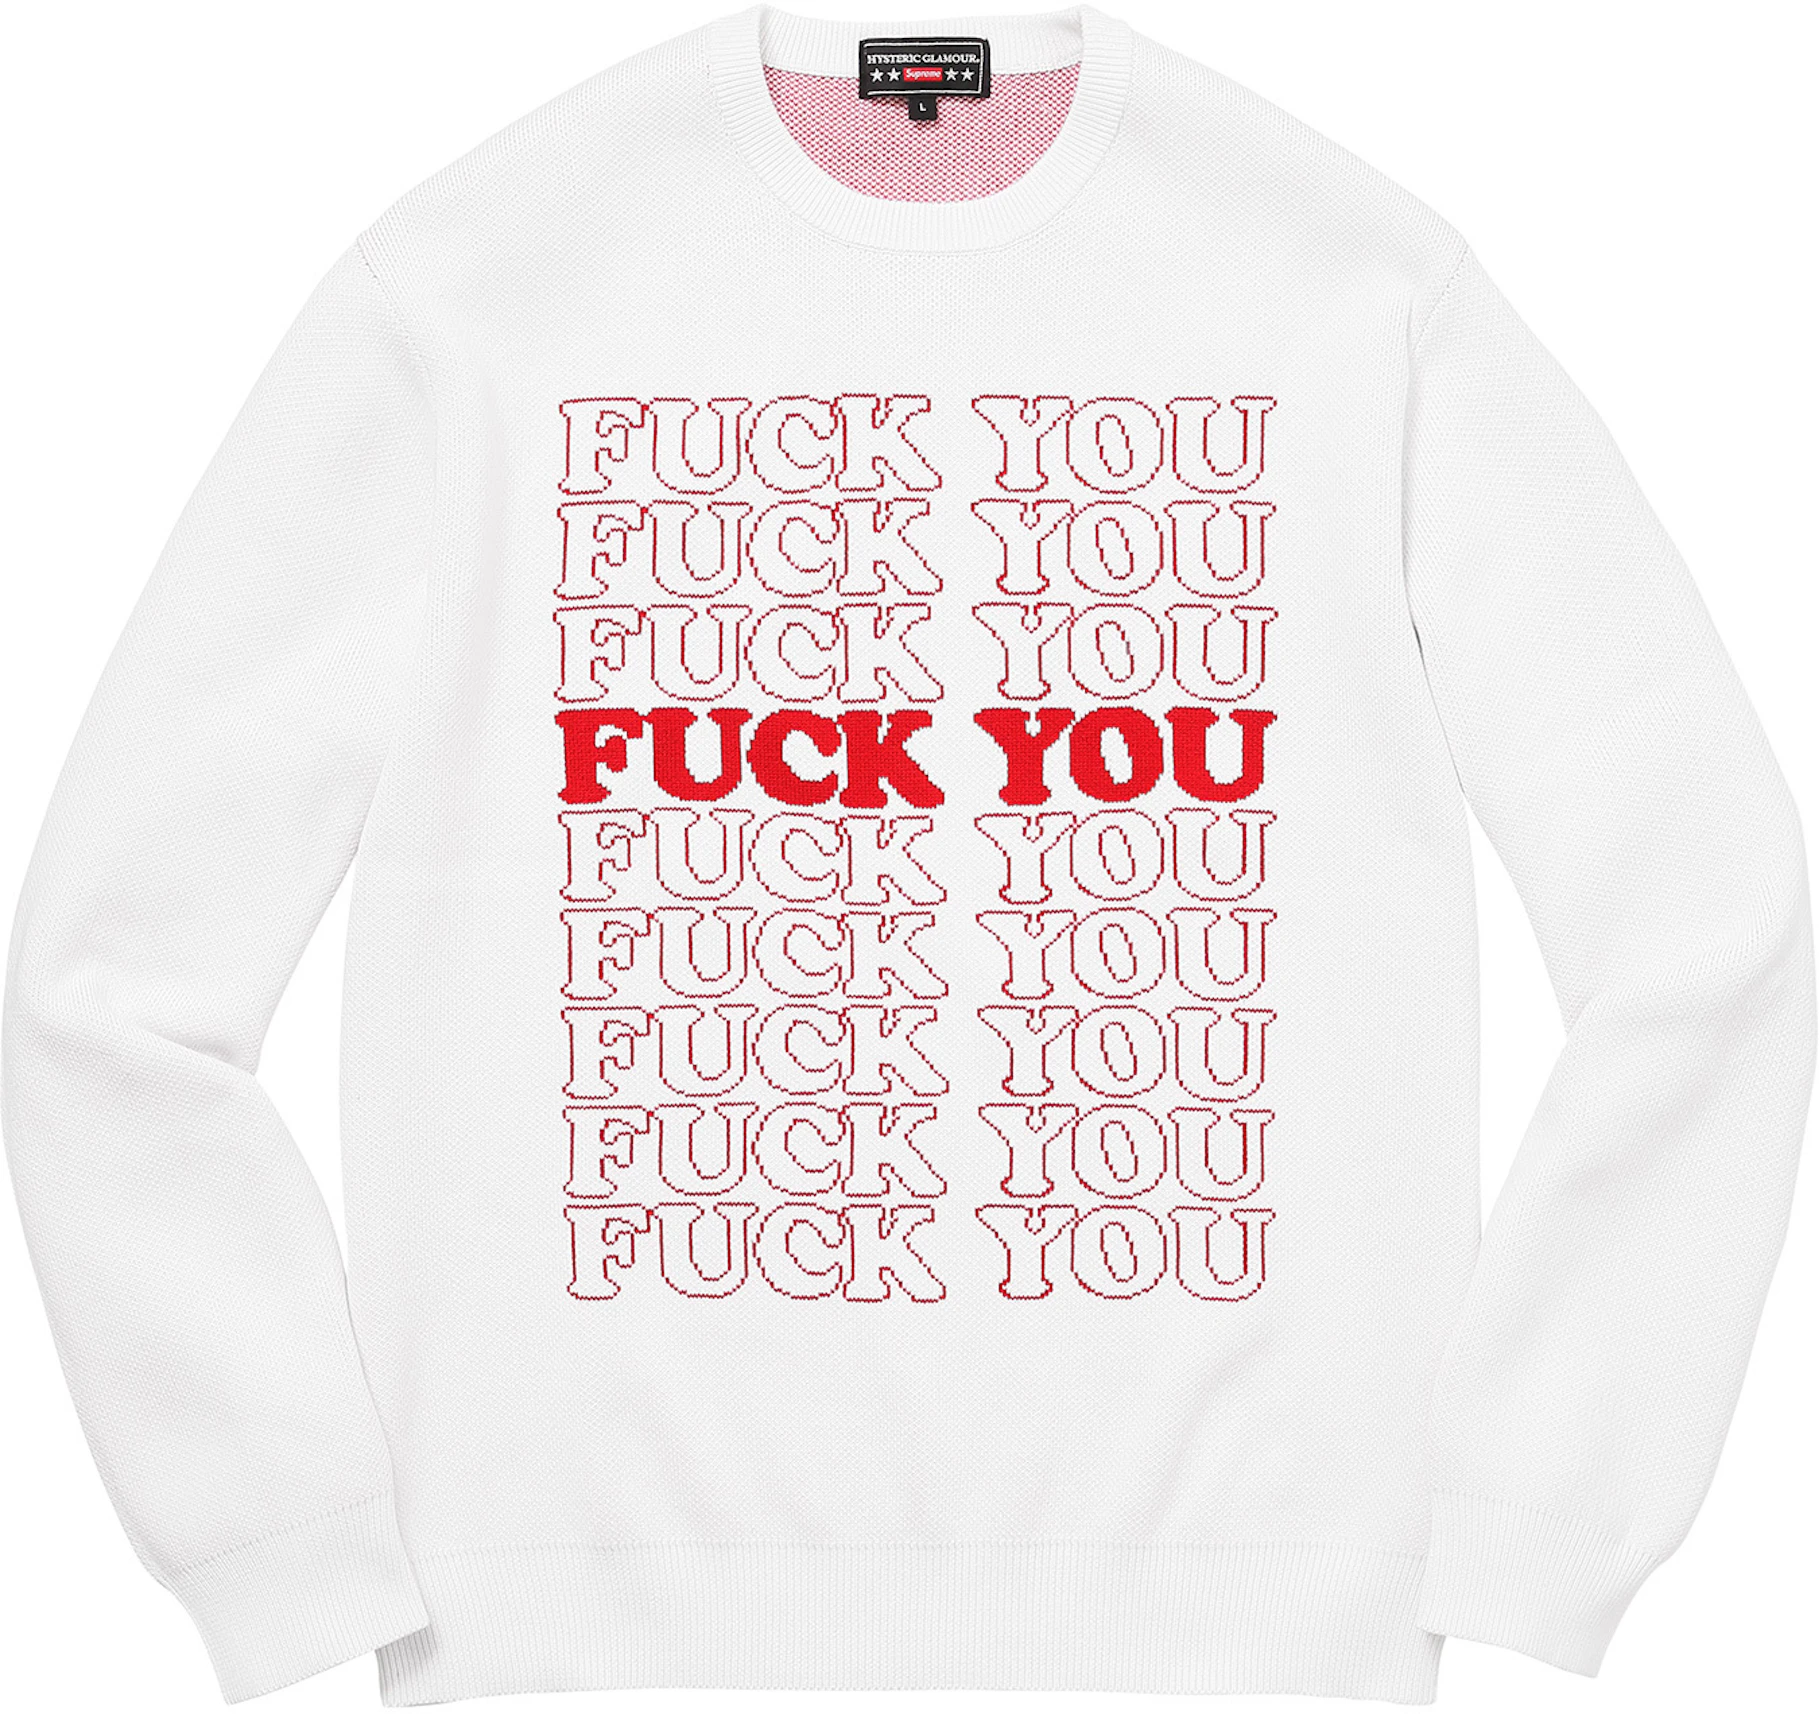 Supreme Hysteric Glamour Fuck You Sweater White Fw17 Gb